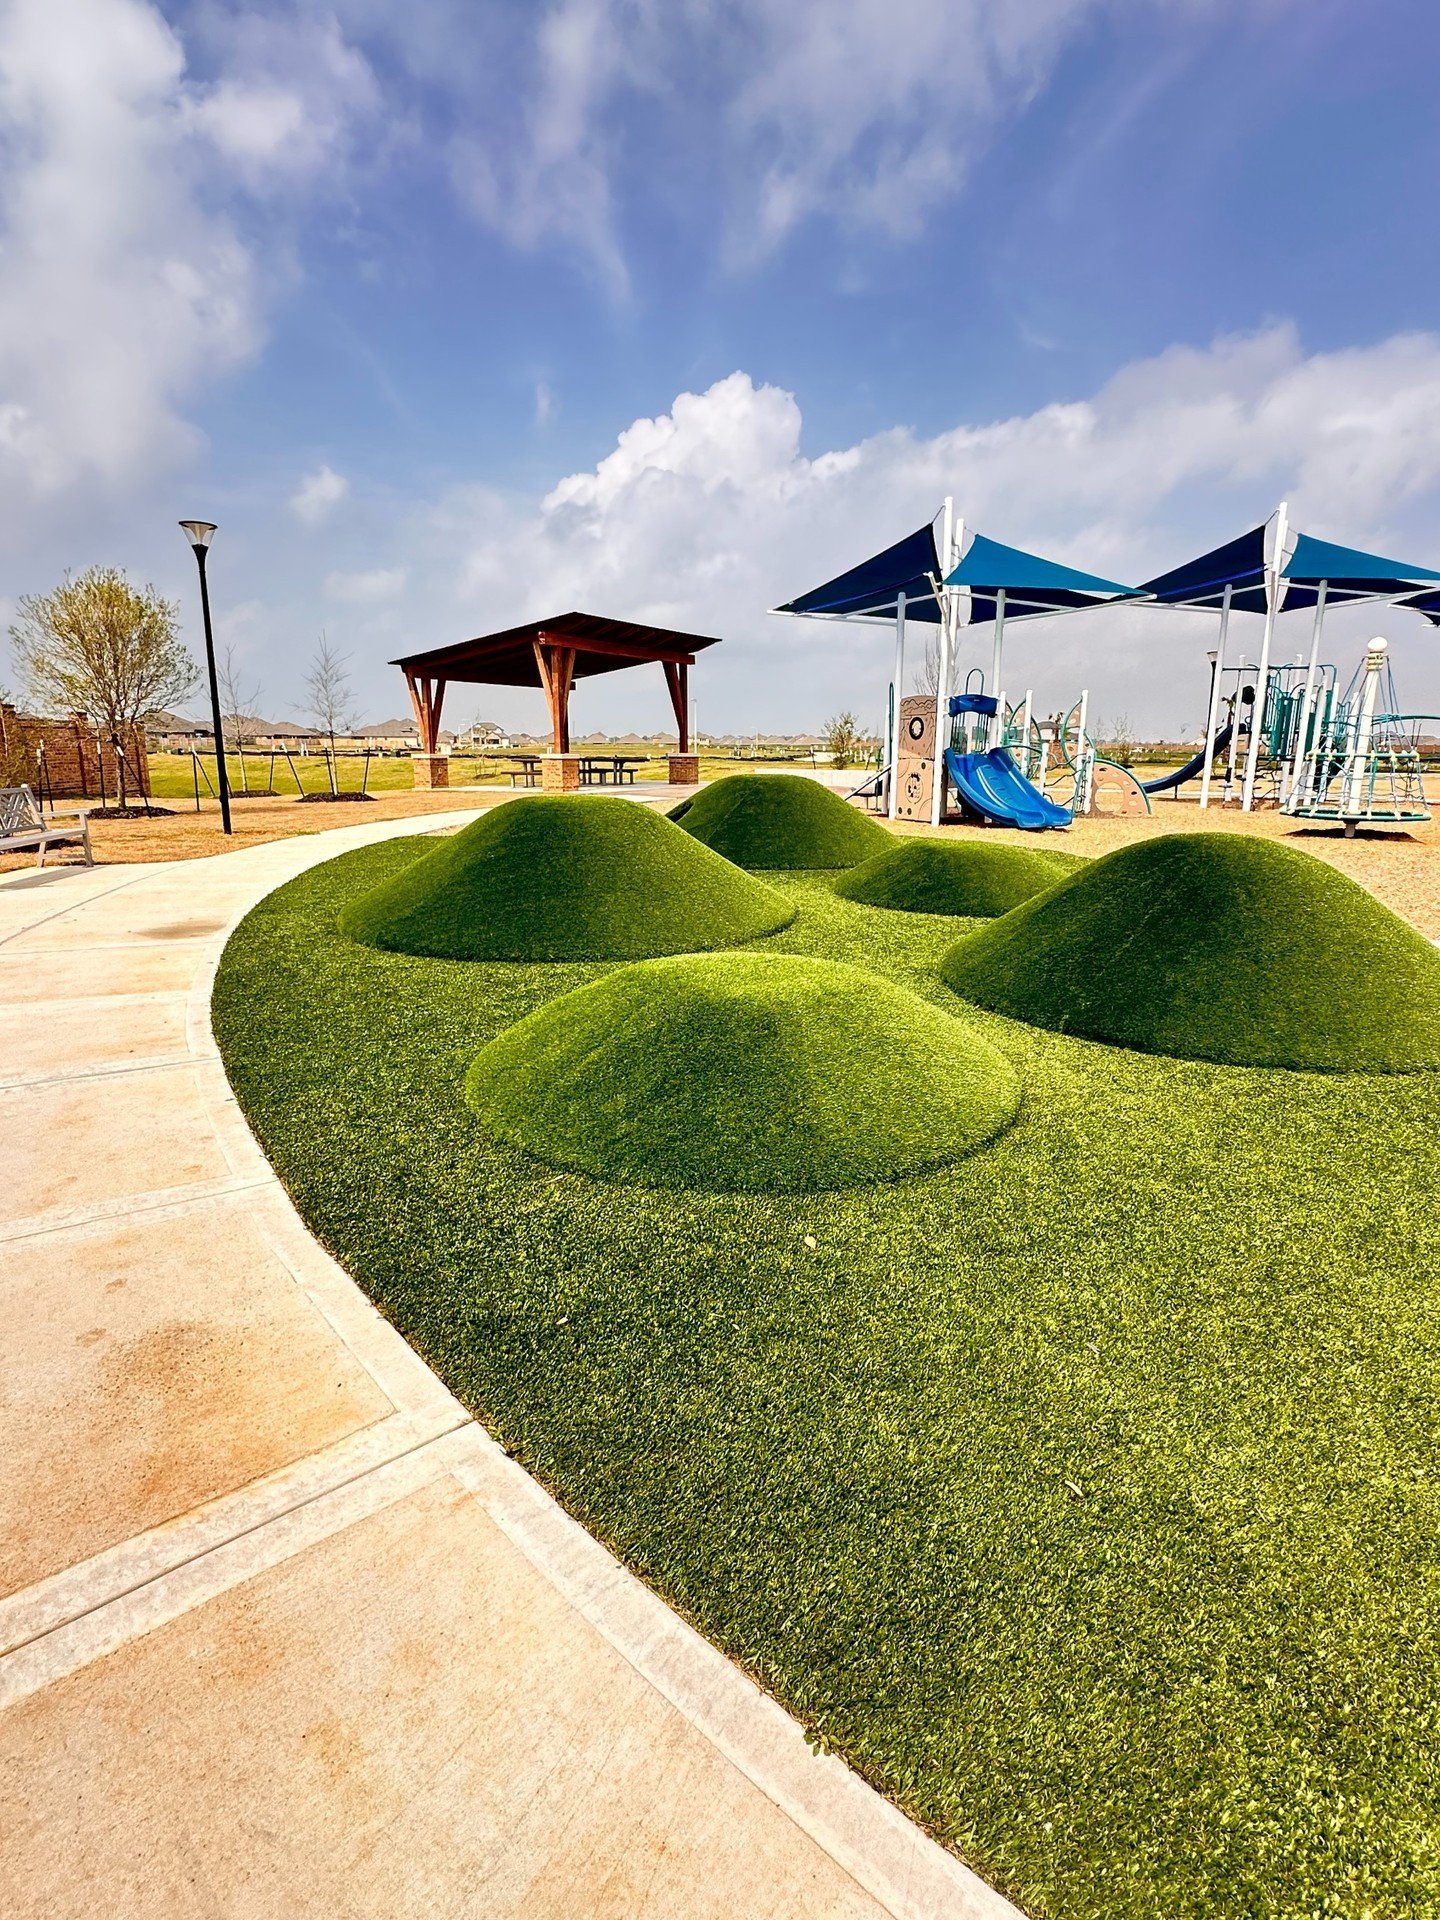 🌿Playground Grass is the safest surface for your little ones to play on! 🌈 Let them explore and let their imaginations run wild on this lush, vibrant playground paradise! 

#PlaygroundGrass #SafePlaygrounds #LetThemPlay 🌟 #austintx #atx #foreverla